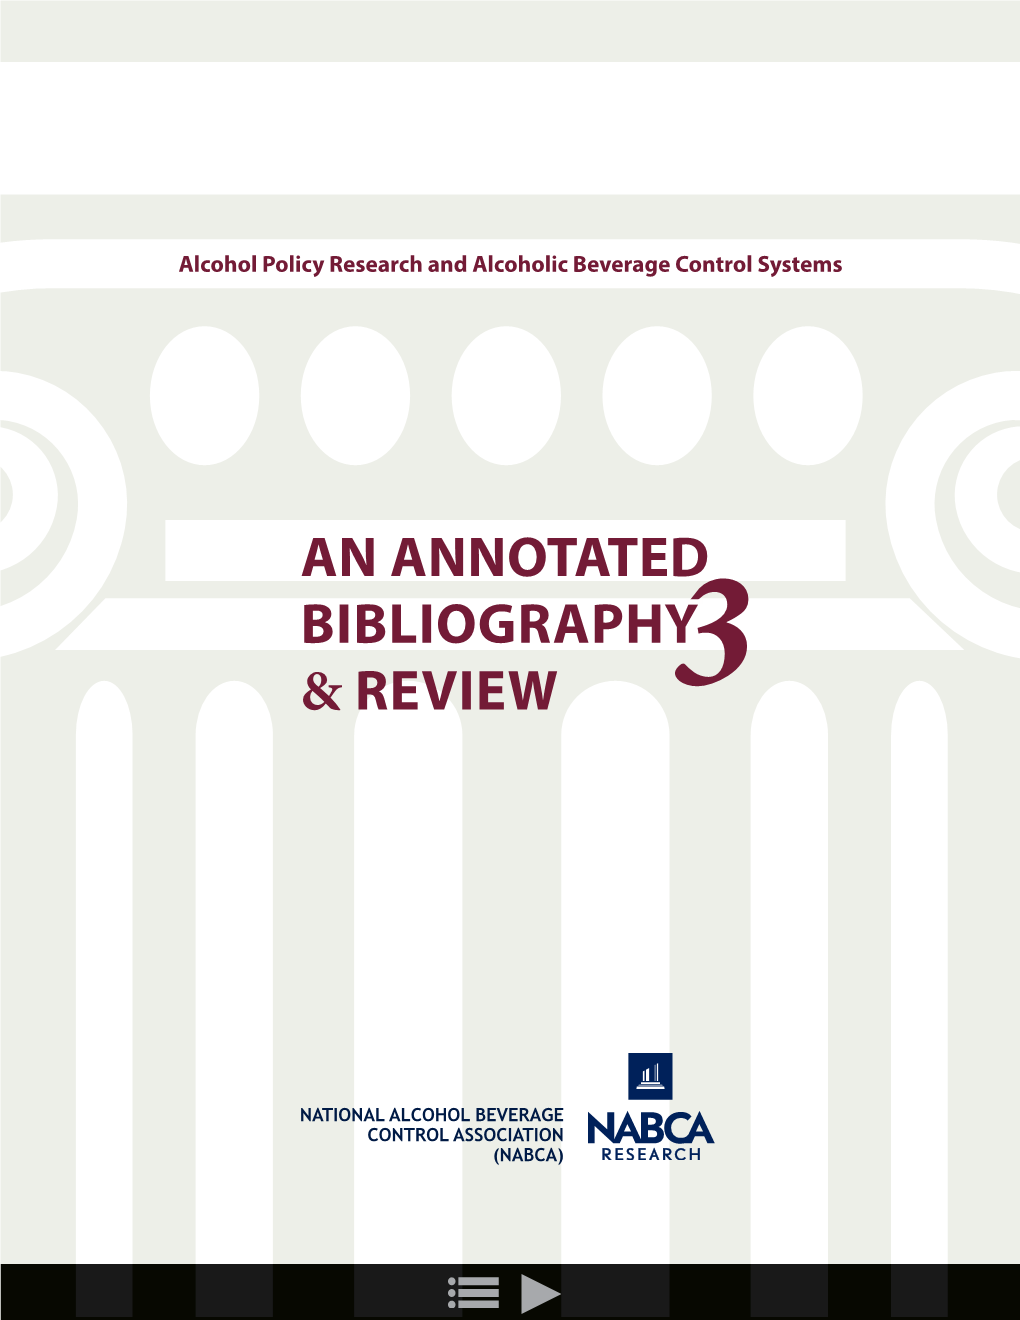 An Annotated Bibliography & Review 3